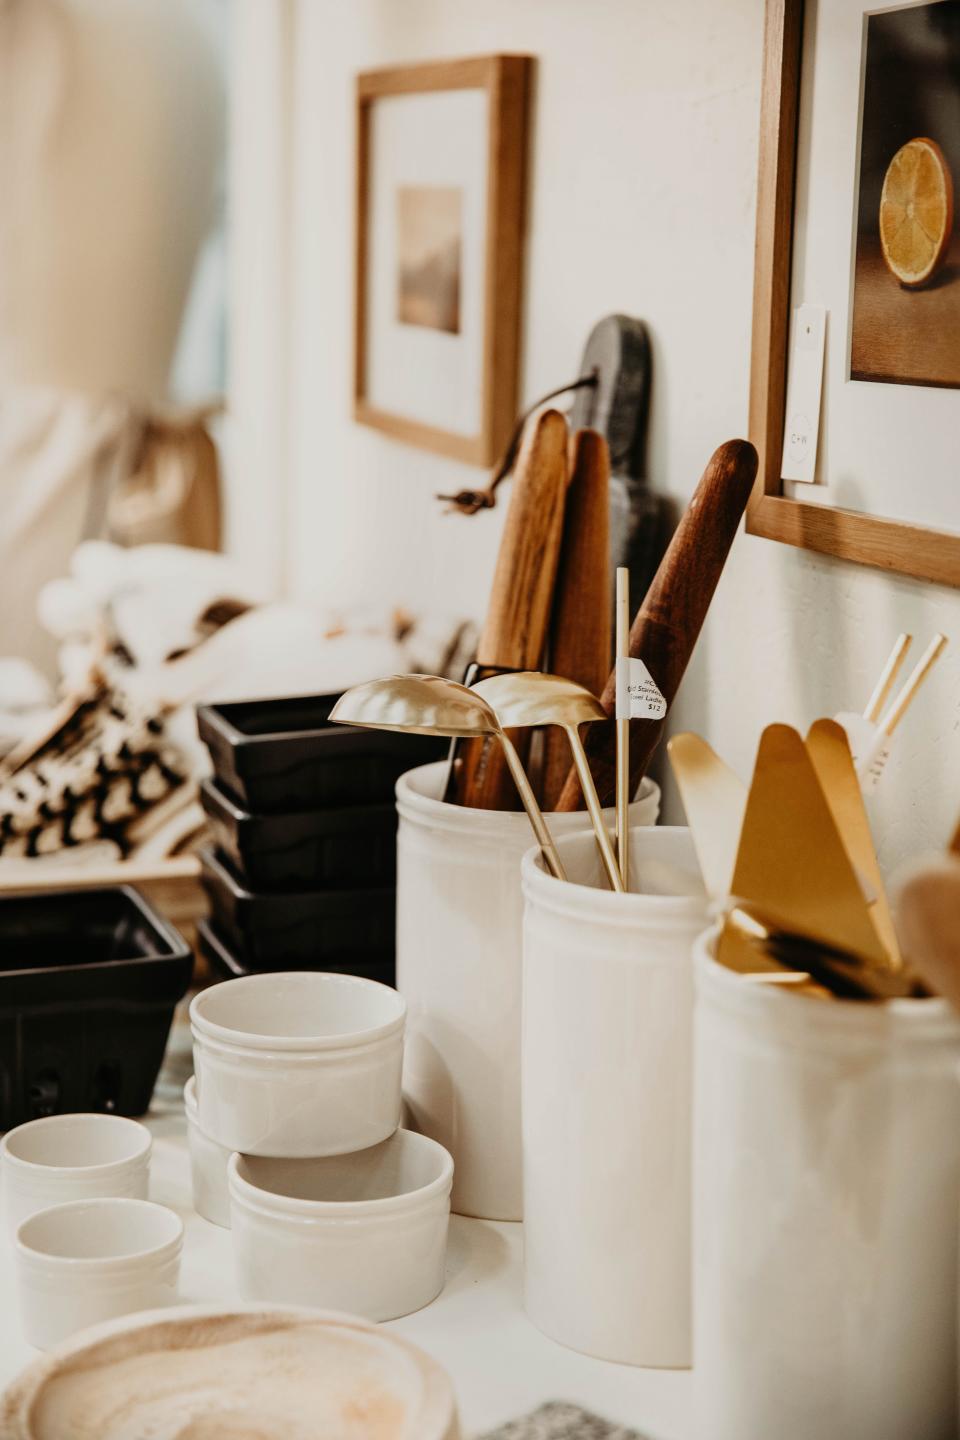 One-of-a-kind handmade and curated items including gifts, fashion and decor will be sold by over 200 vendors under one roof at Painted Tree Marketplace.